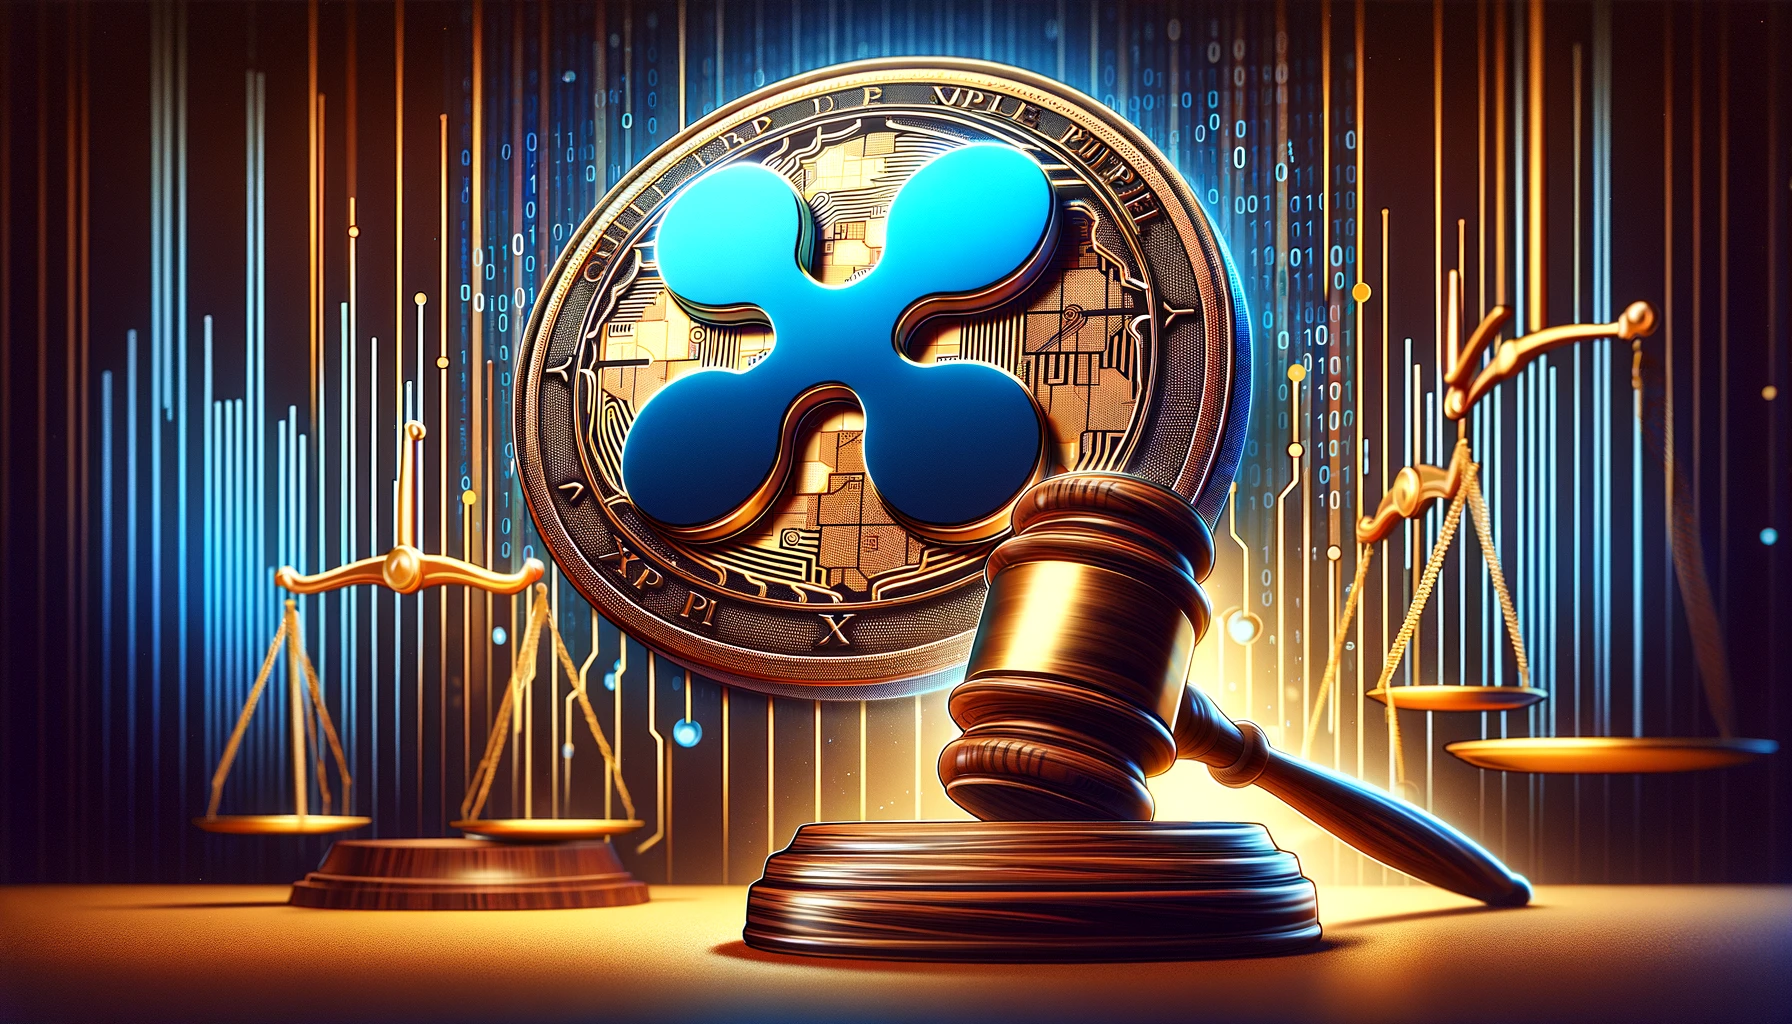 Ripple lawyers challenge SEC chair on crypto stance - African News - News